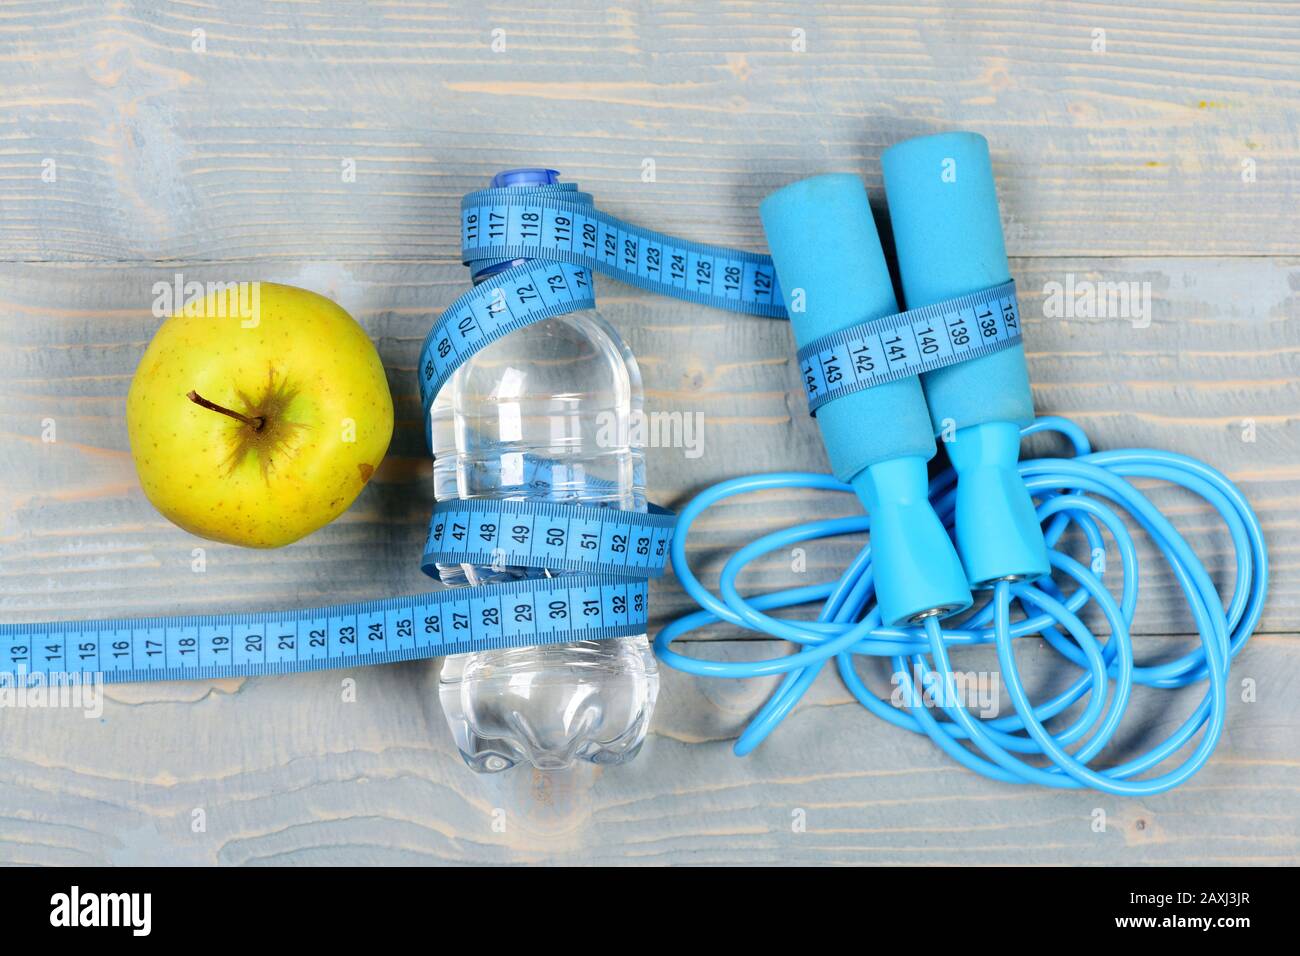 https://c8.alamy.com/comp/2AXJ3JR/centimeter-tied-around-sports-equipment-in-cyan-blue-on-wooden-vintage-background-tools-for-healthy-lifestyle-workout-and-weight-loss-concept-bottle-apple-measuring-tape-and-jump-rope-top-view-2AXJ3JR.jpg